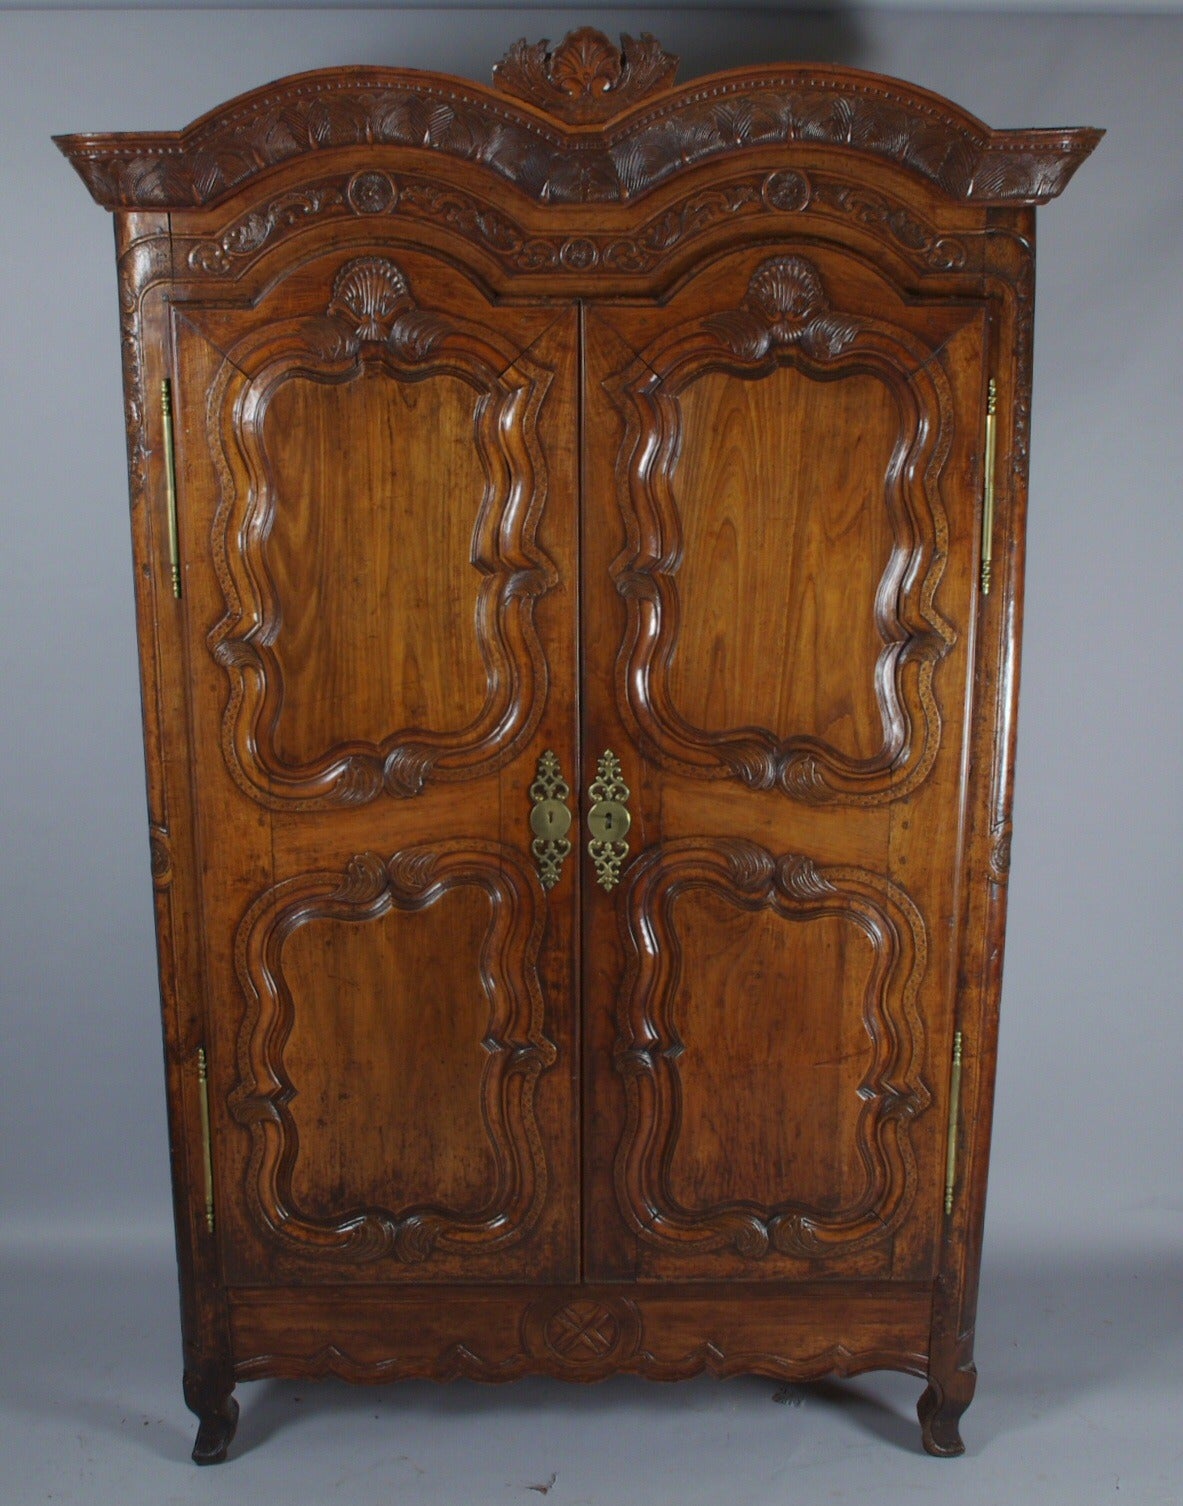 Louis XV Provincial walnut double arched armoire, the leaf carved cornice surmounted by a freestanding shell; the two doors, each with inset panels, opening to an interior fitted with modern shelves, on short cabriole legs joined by a shaped apron